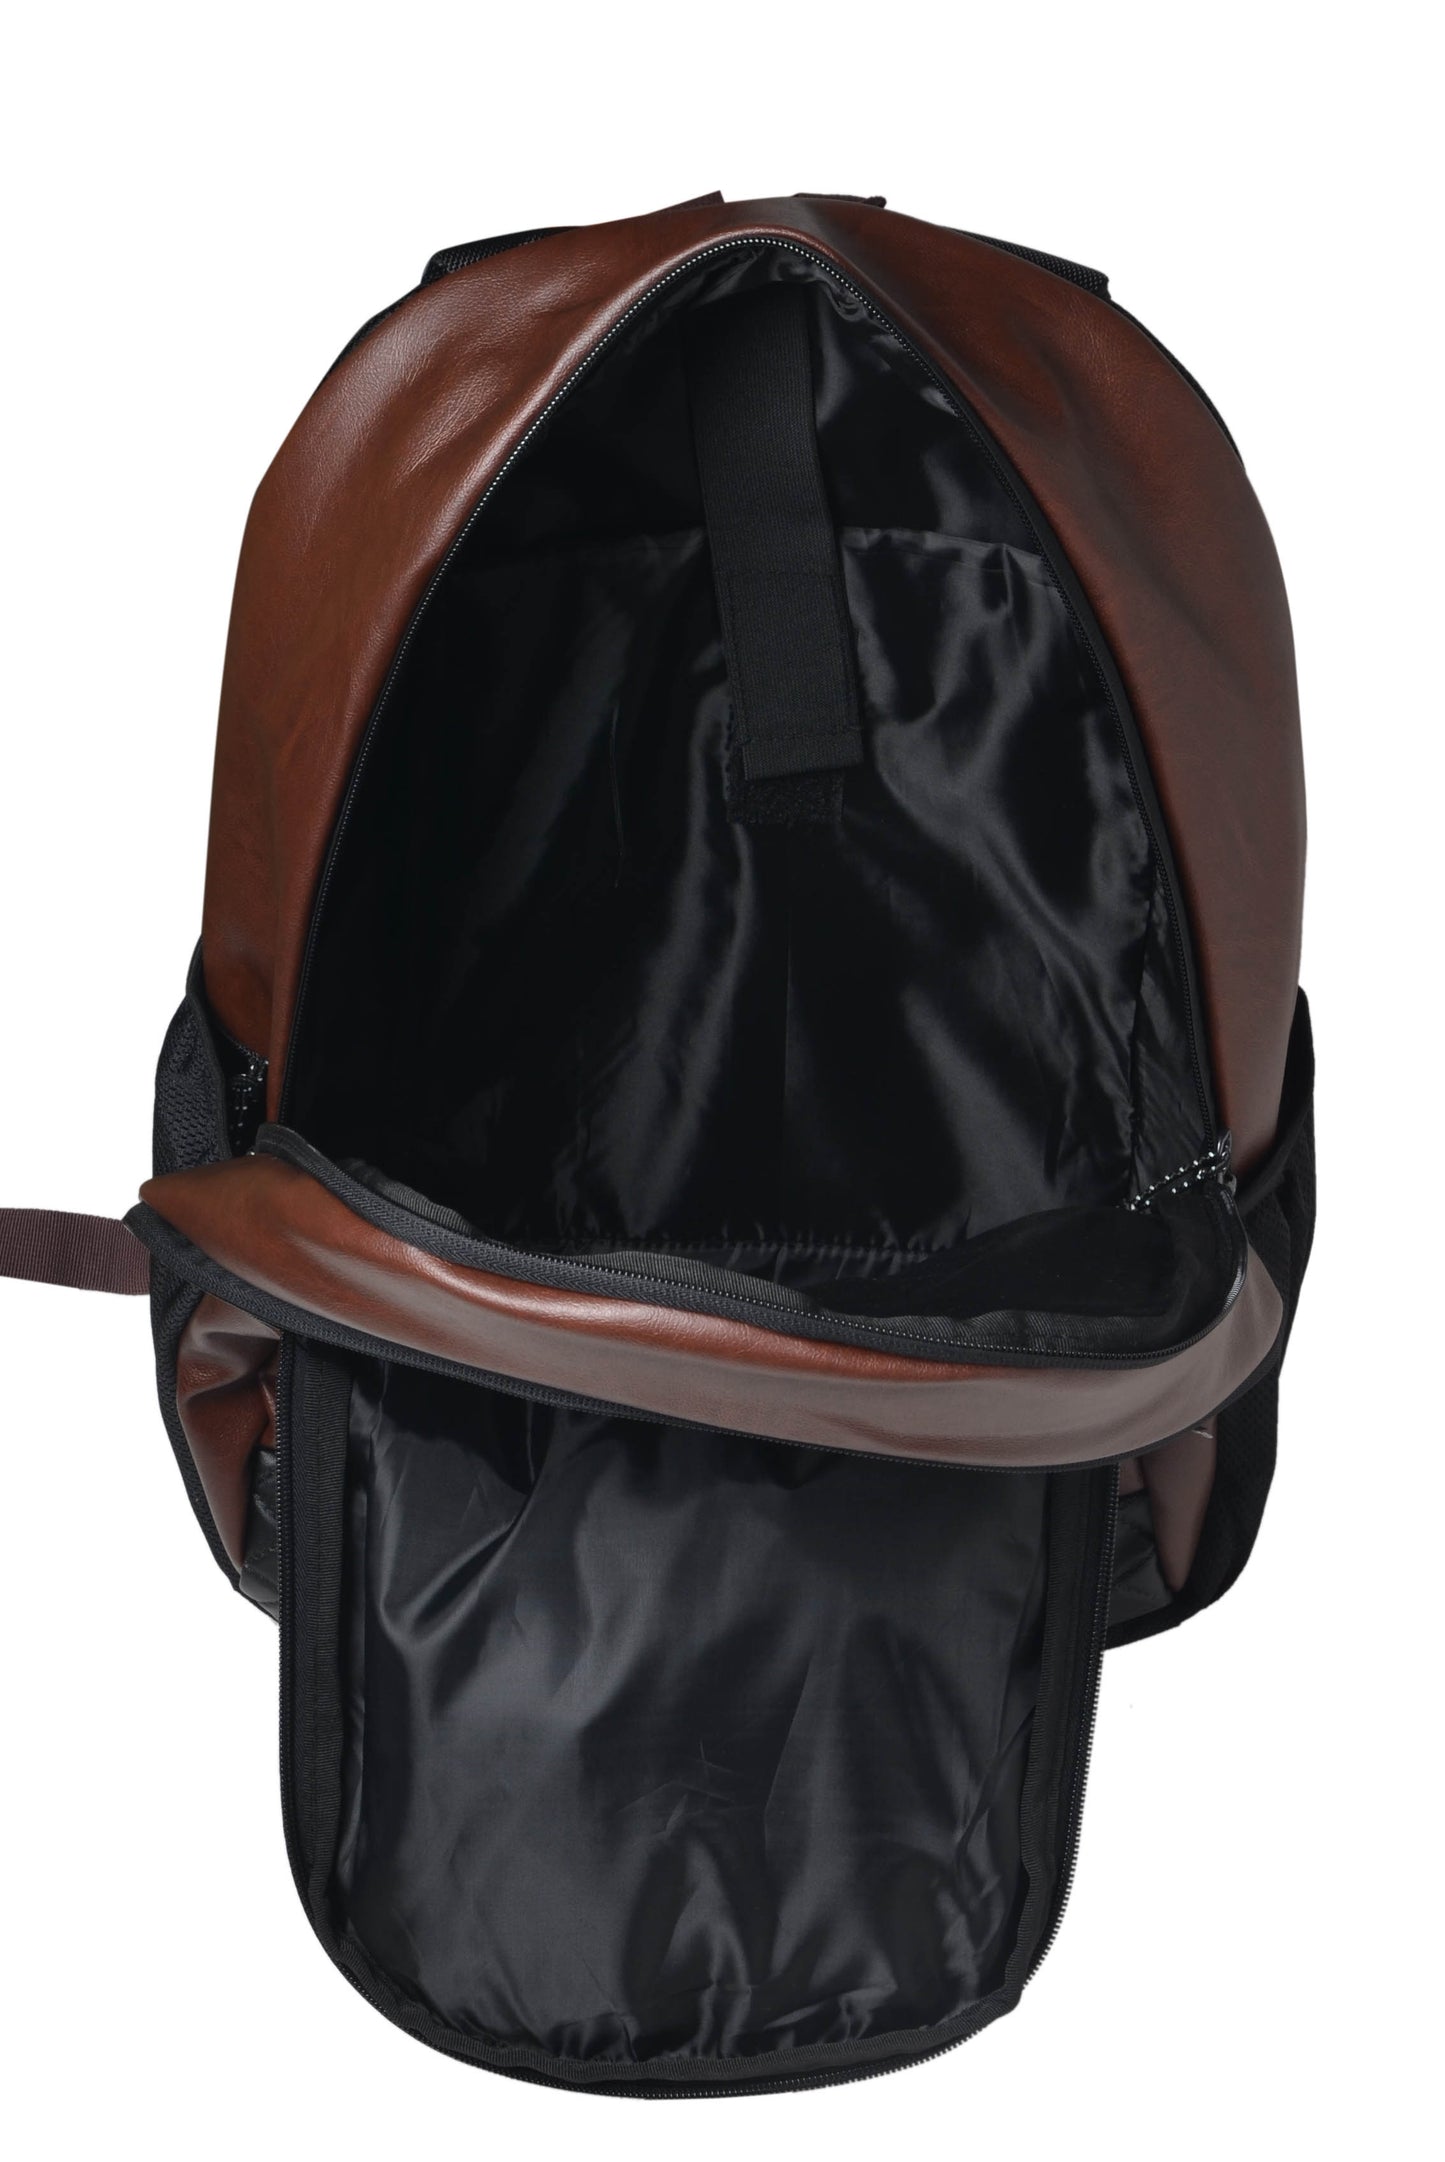 CEO 25L Brown Laptop Backpack